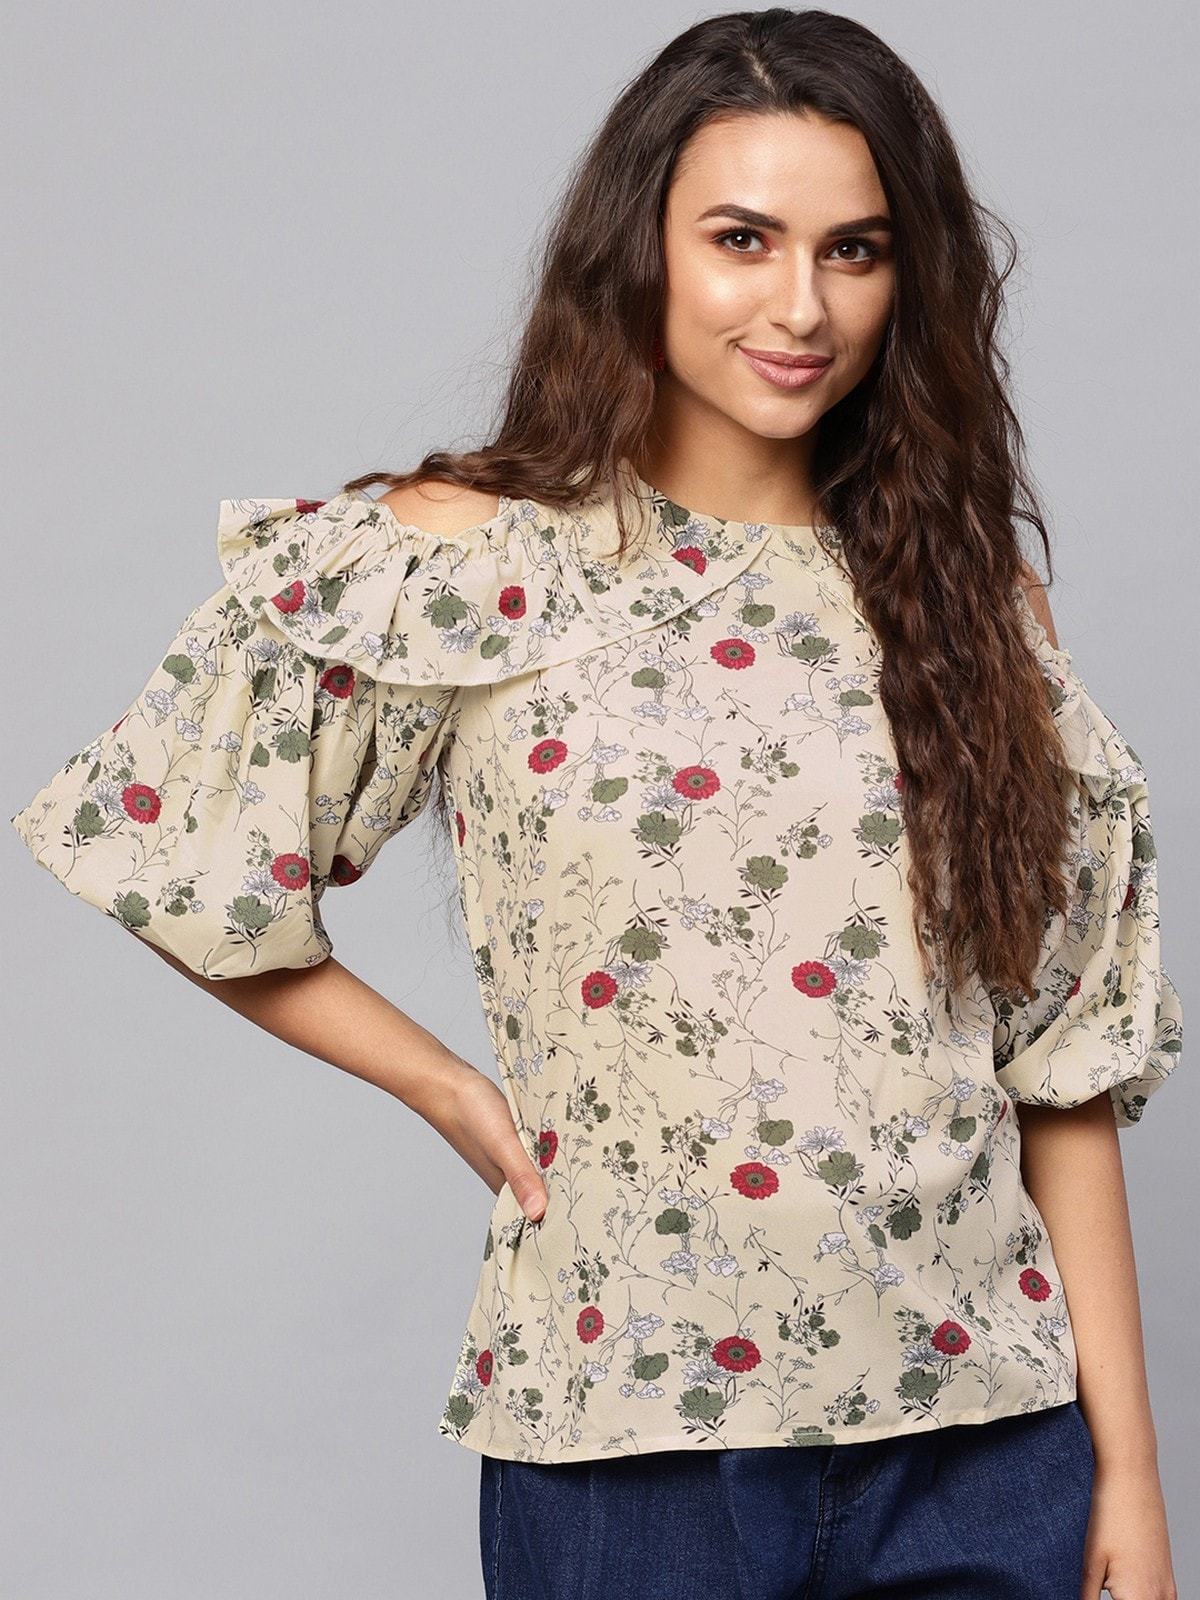 Women's Floral Cold-Shoulder Top With Voluminous Sleeves - Pannkh